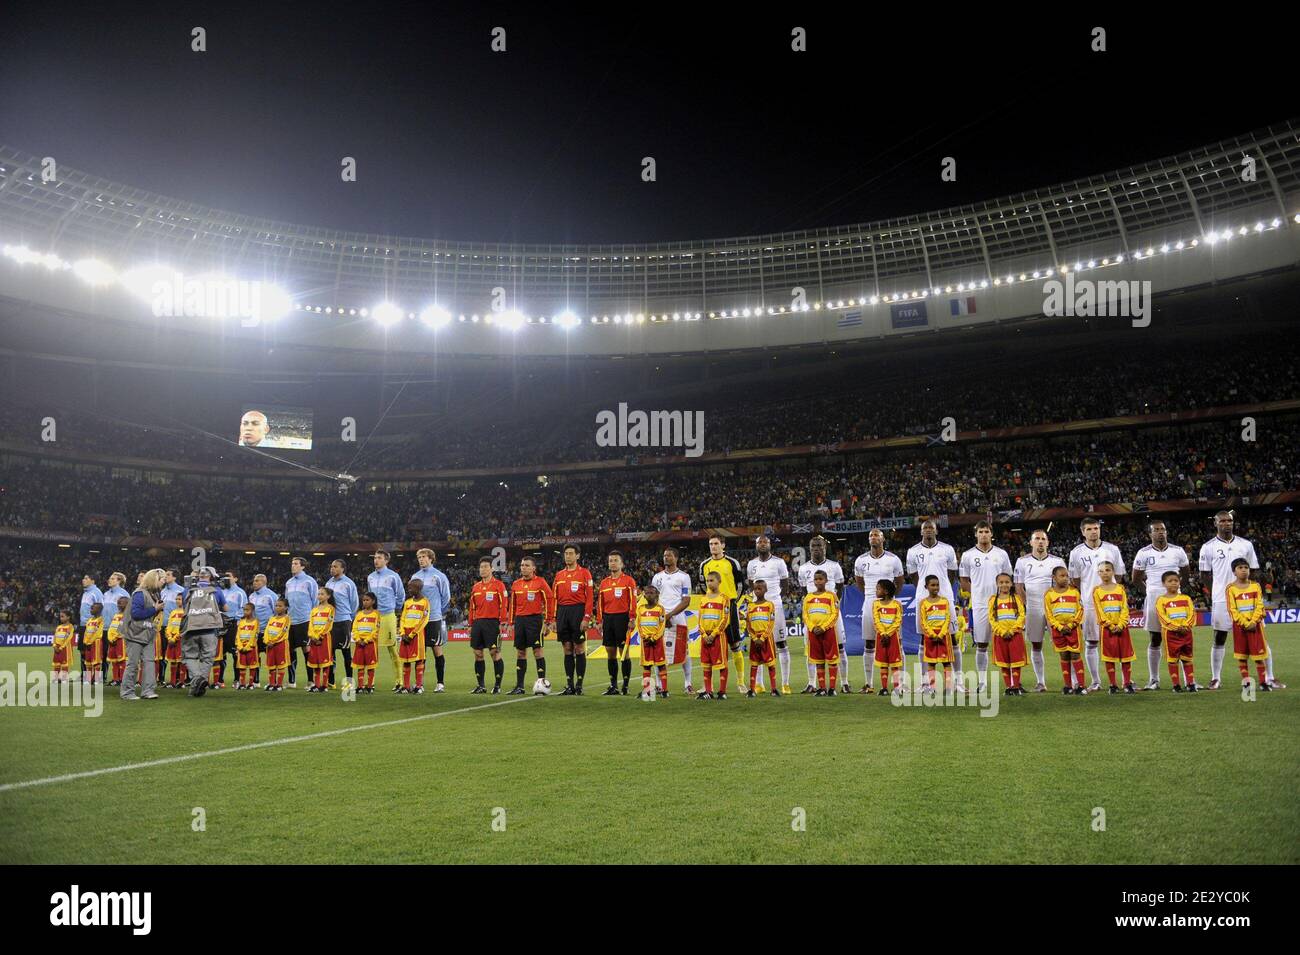 France national football team players and Uruguay national football team players on the pitch before the FIFA World Cup soccer match, France (France national football team) vs Uruguay in Capetown, South Africa, on June 11, 2010. The match ended in a 0-0 draw. Photo by Christophe Guibbaud/Cameleon/ABACAPRESS.COM Stock Photo